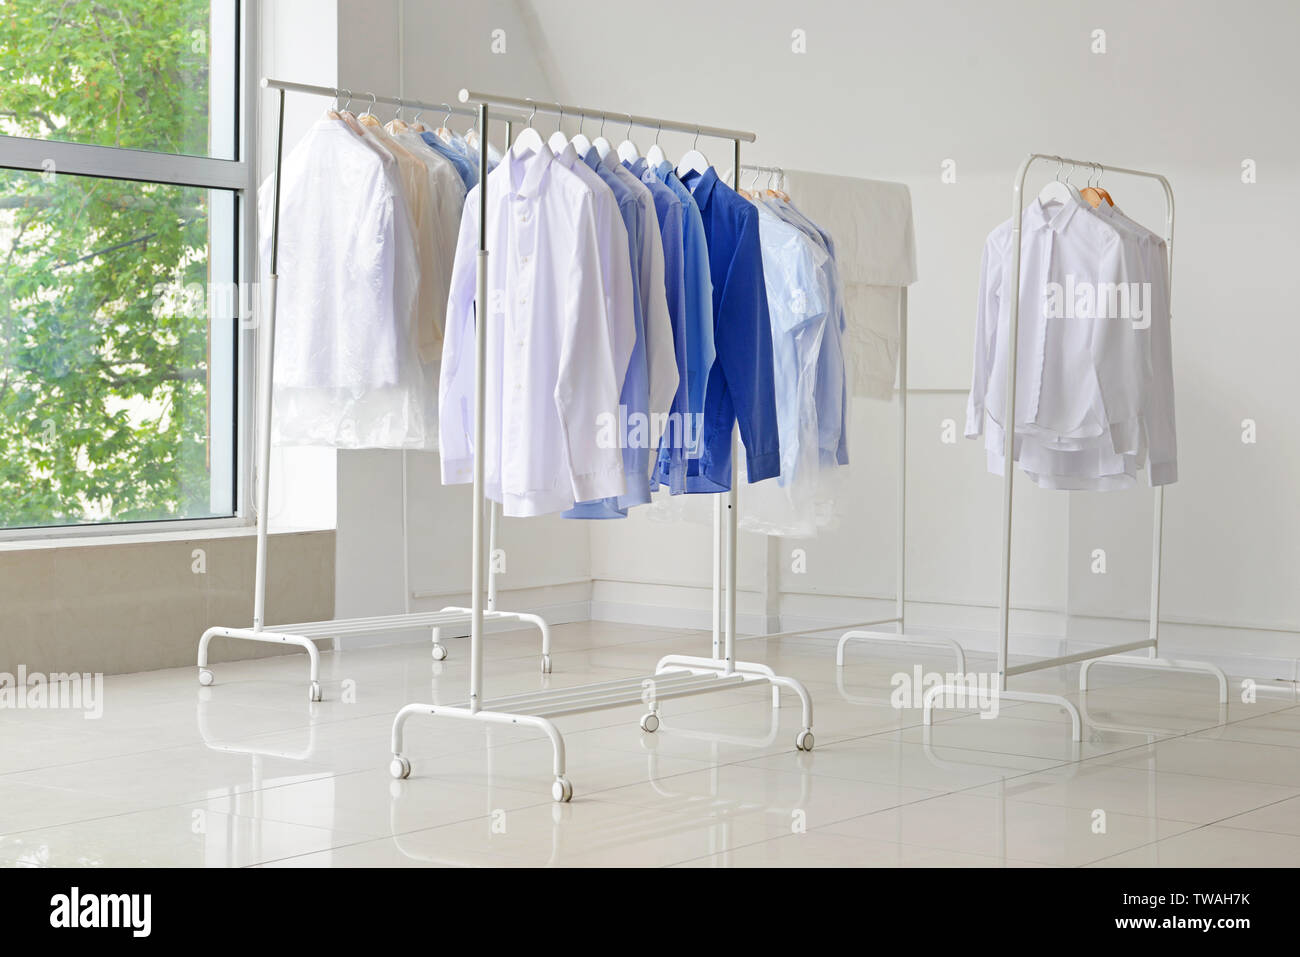 https://c8.alamy.com/comp/TWAH7K/racks-with-clothes-after-dry-cleaning-indoors-TWAH7K.jpg